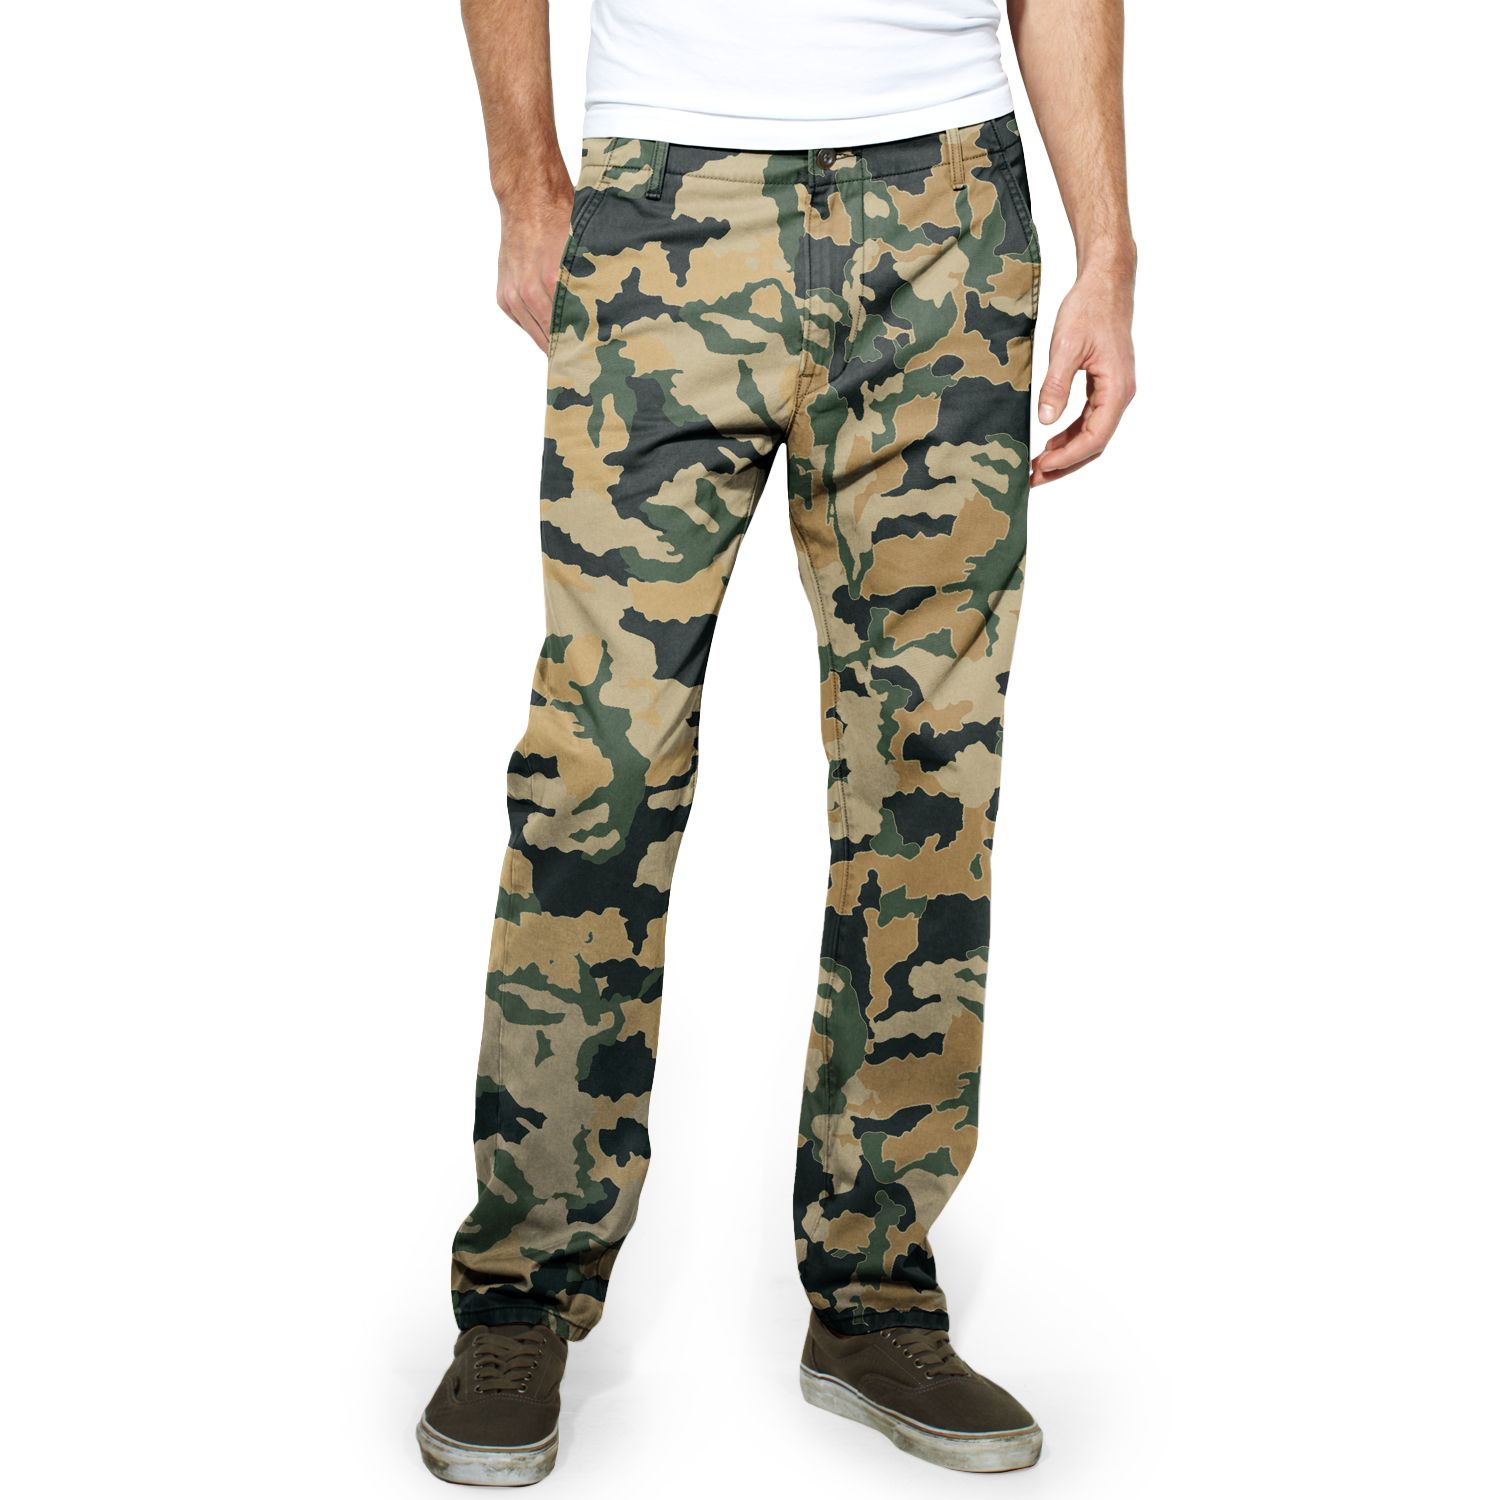 levis army cargo pants